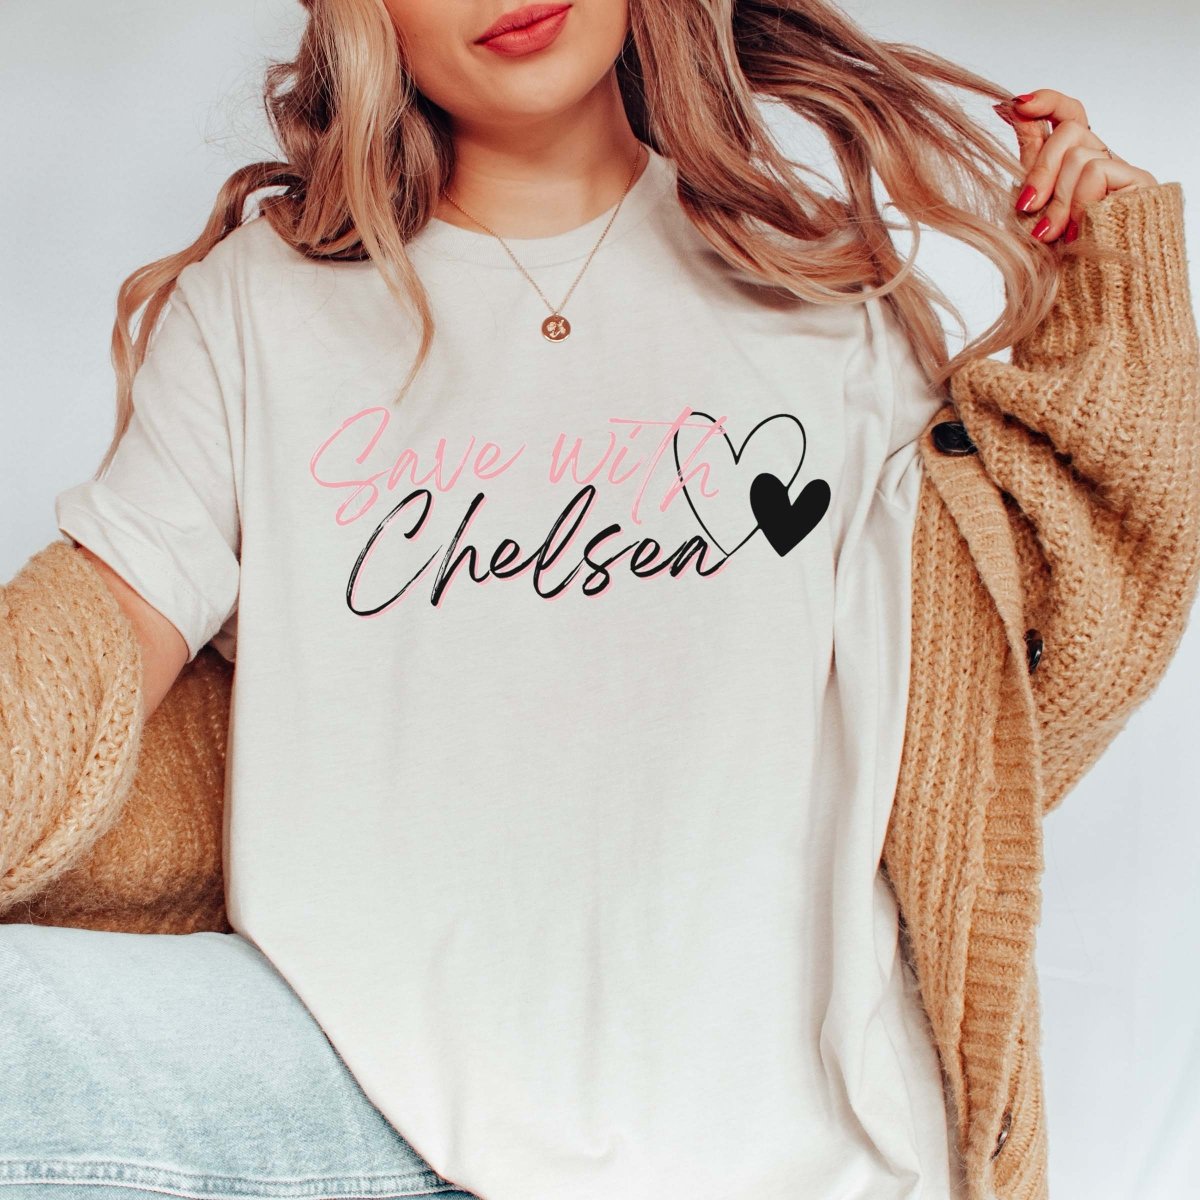 Save With Chelsea Script Tee